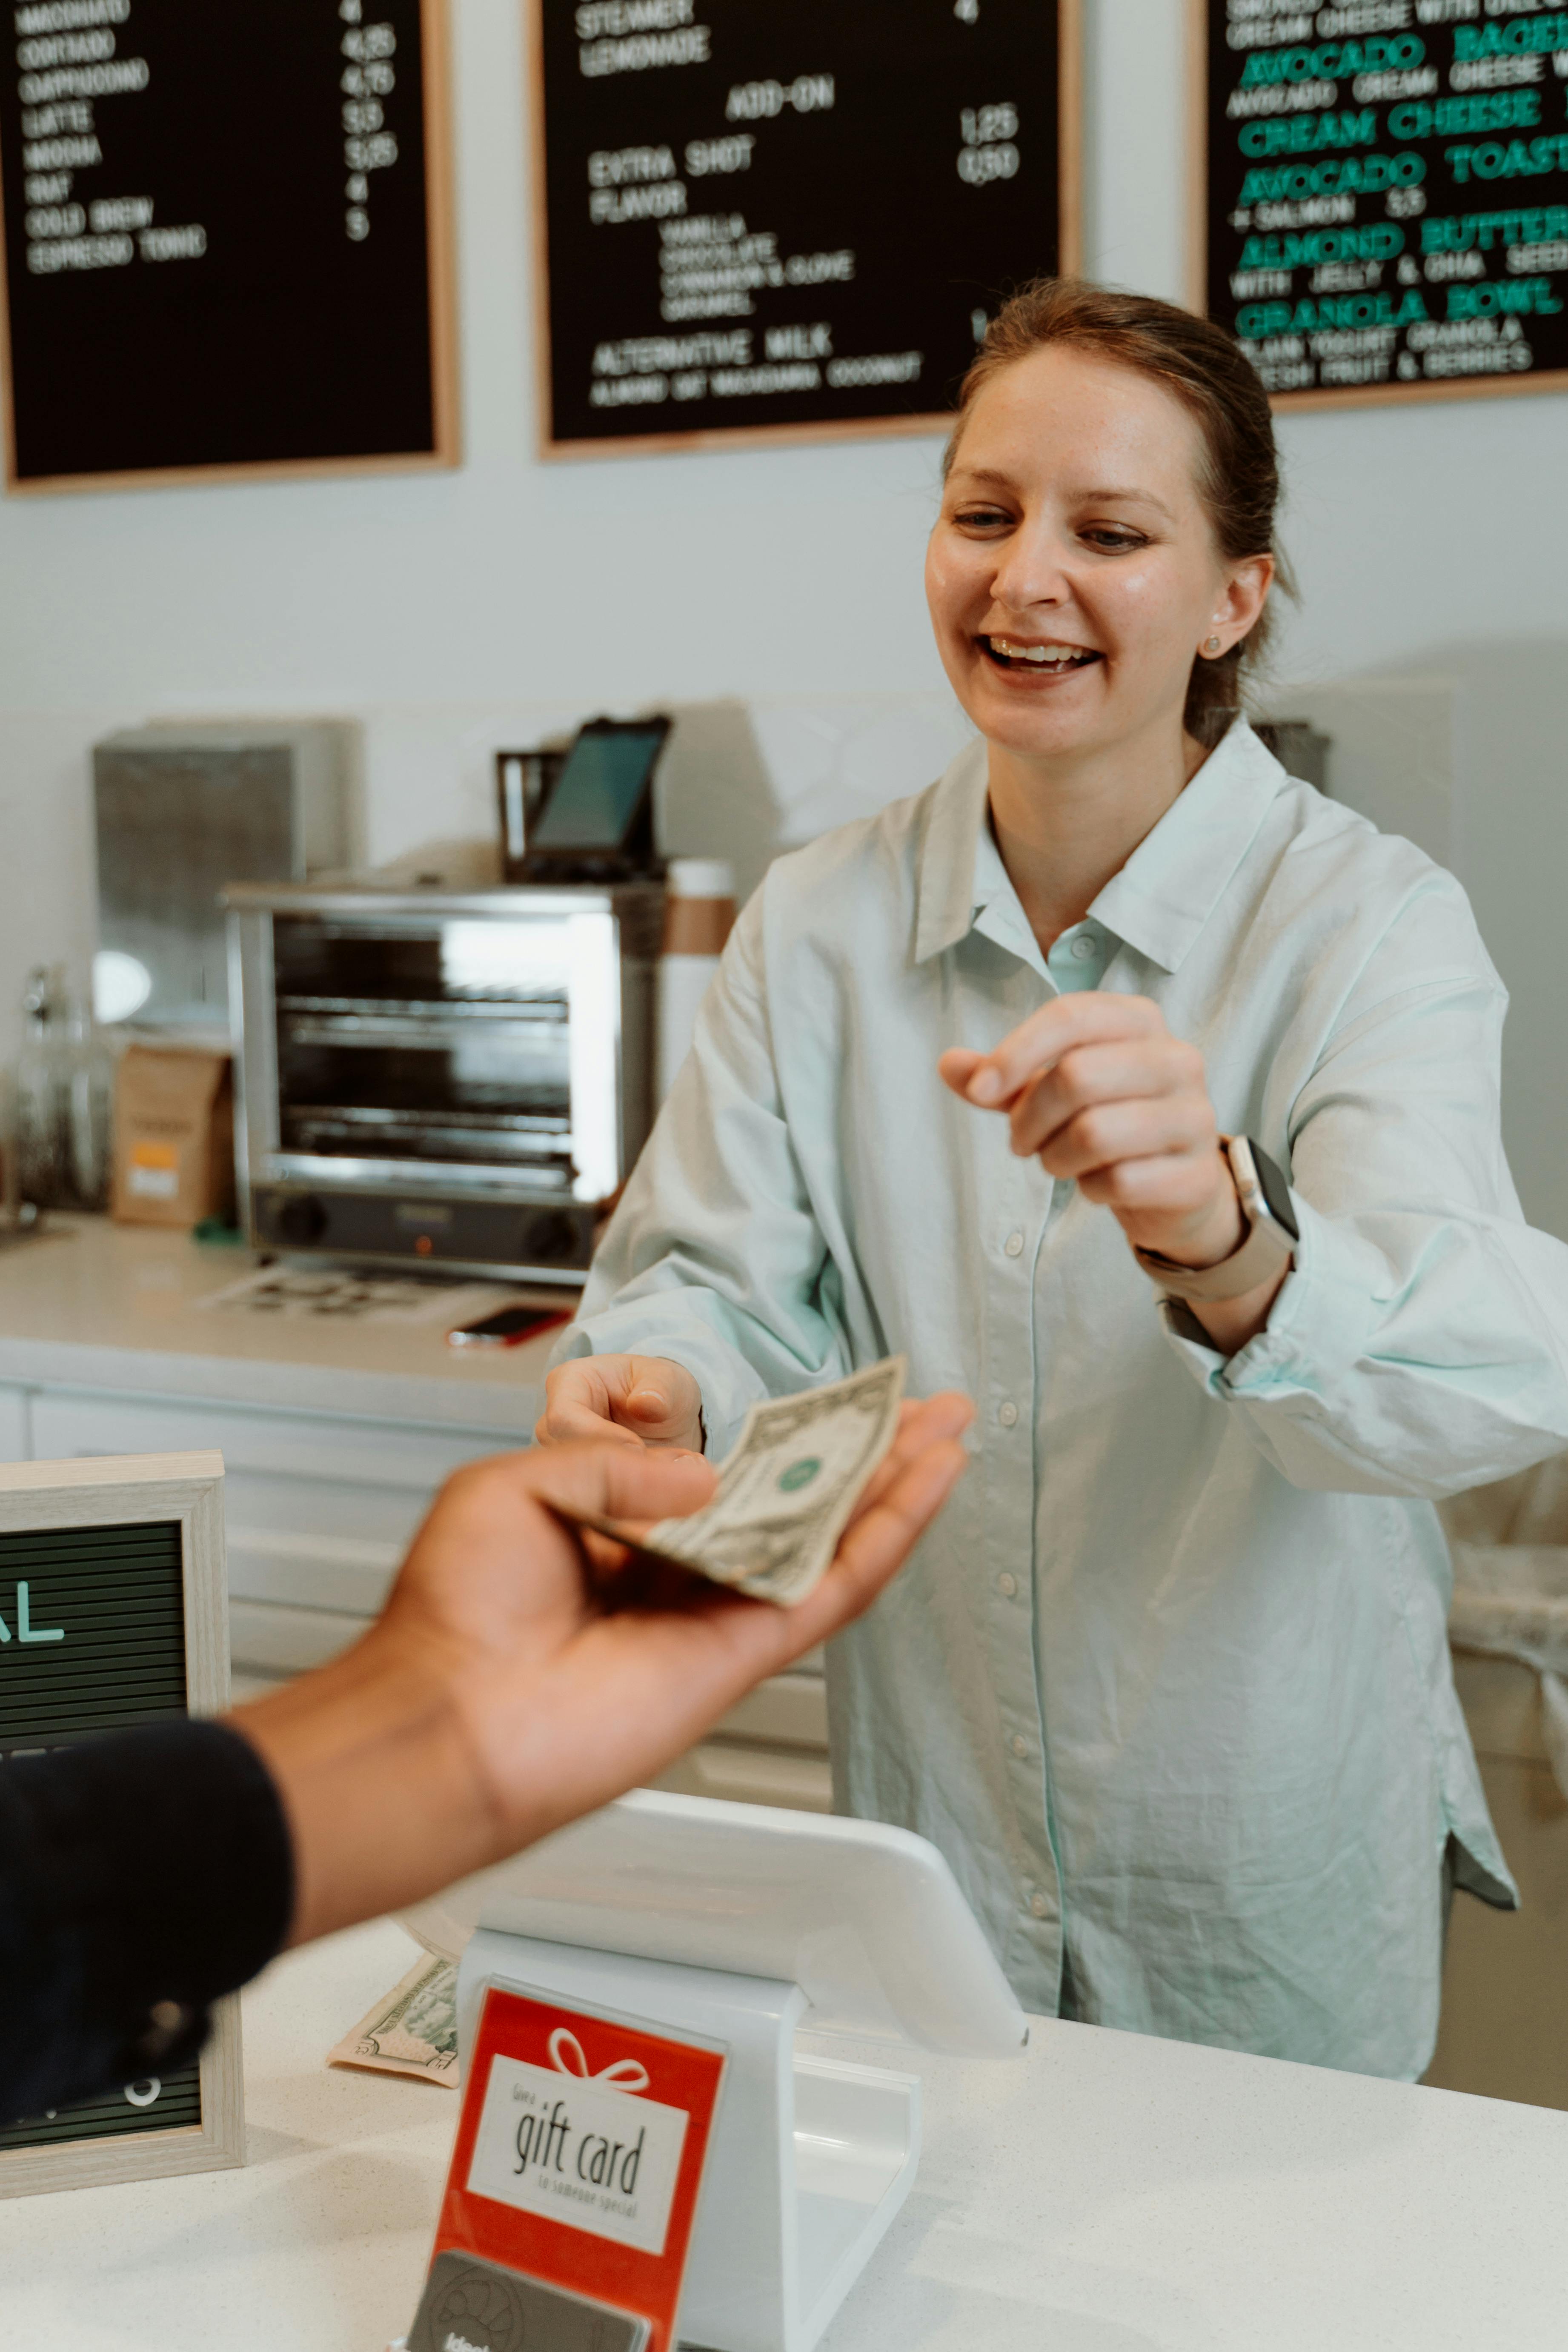 A woman receiving money from a customer | Source: Pexels